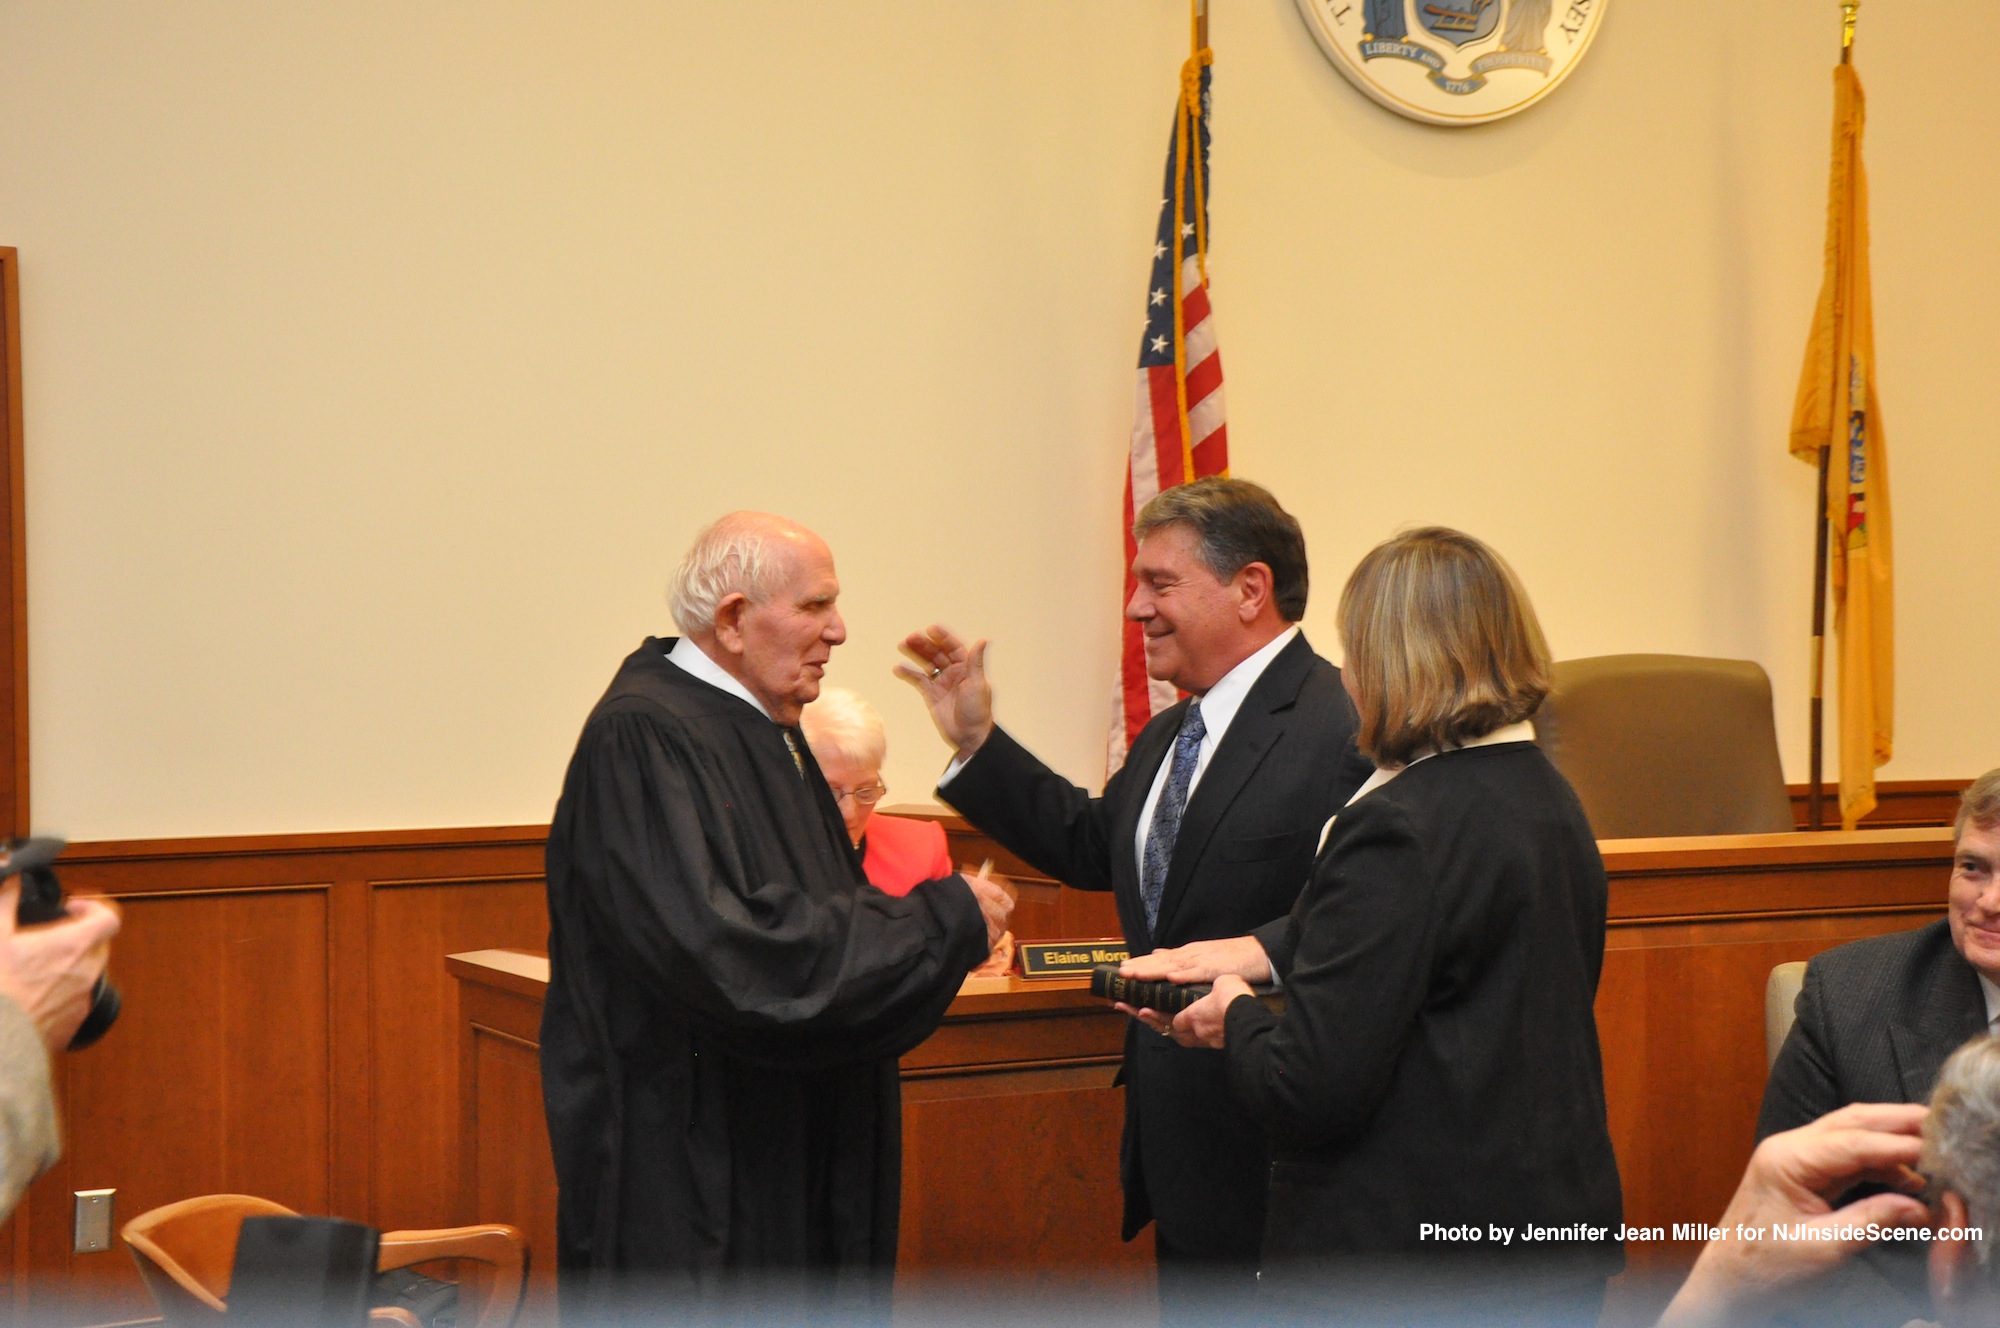 Surrogate Gary Chiusano, sworn in by Judge Frederic Weber. Laura Camp, Deputy Surrogate, participated. Chiusano's wife, Carol, was unable to attend, as she has for past swearing ins, due to a work conflict following the snowstorm.